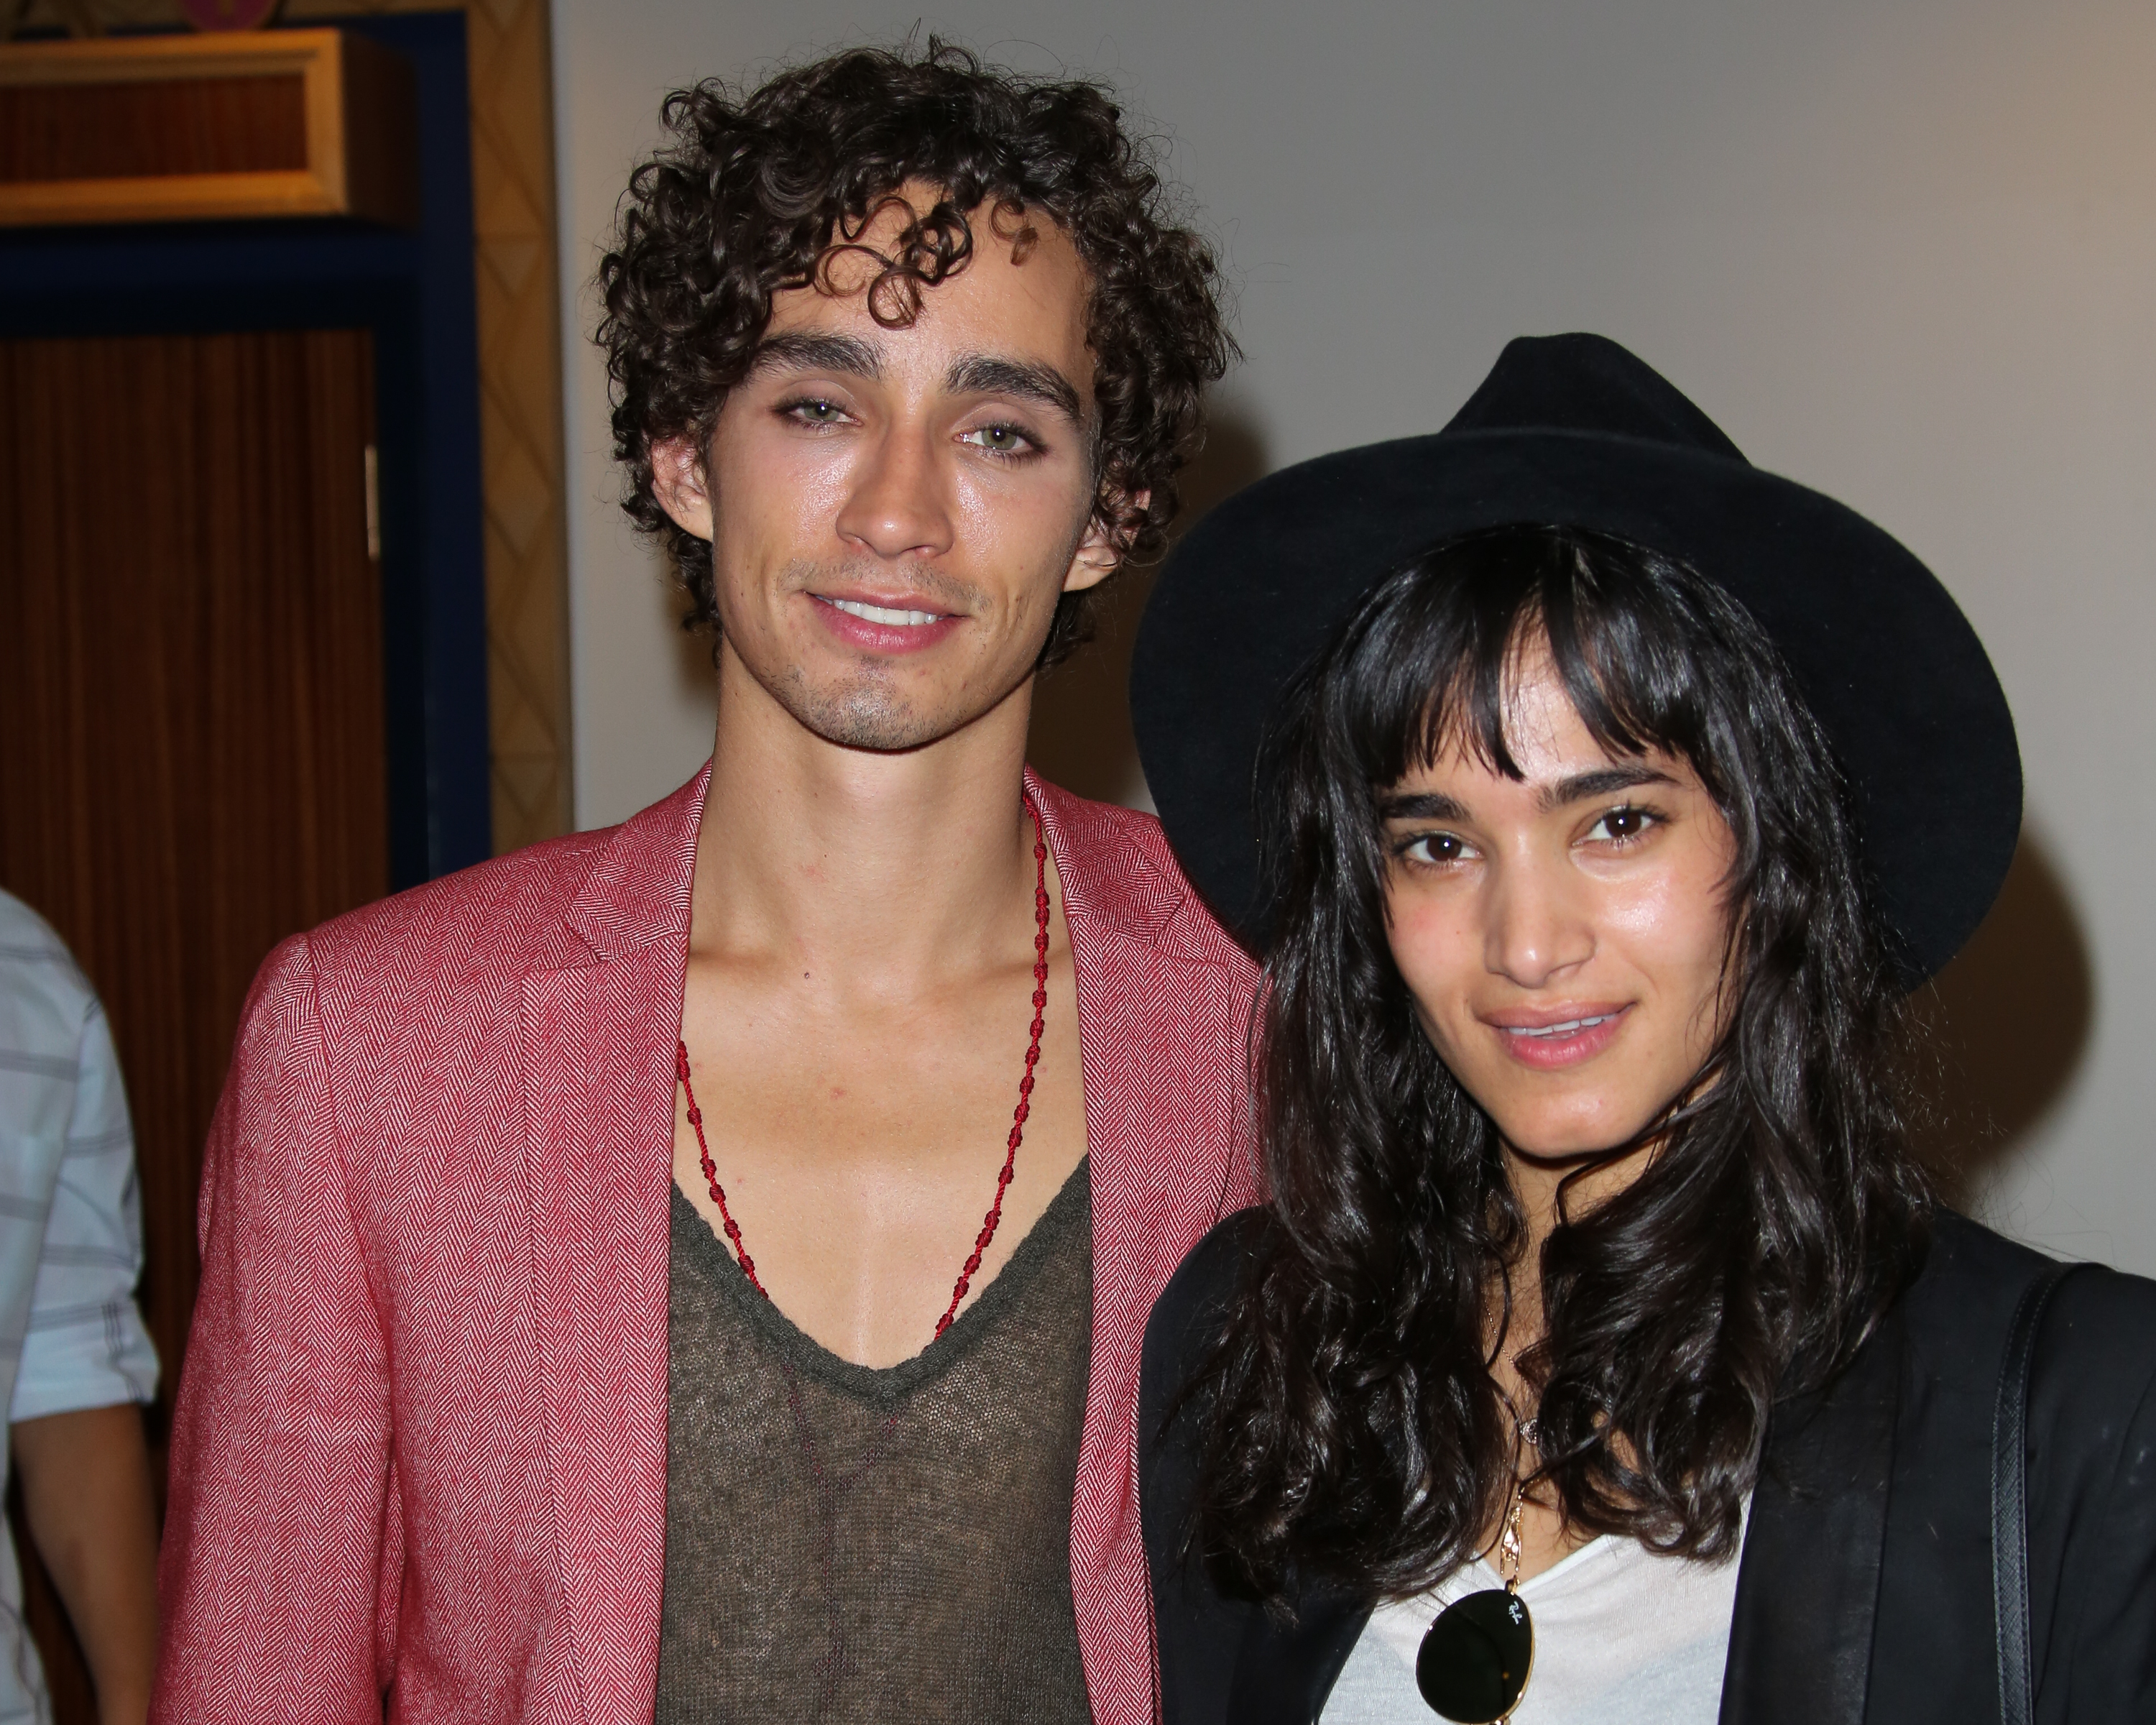 Robert Sheehan and Sofia Boutella attend the premiere of "The Road Within" at the 2014 Los Angeles Film Festival at Regal Cinemas L.A. Live on June 18, 2014 in Los Angeles, California. | Source: Getty Images